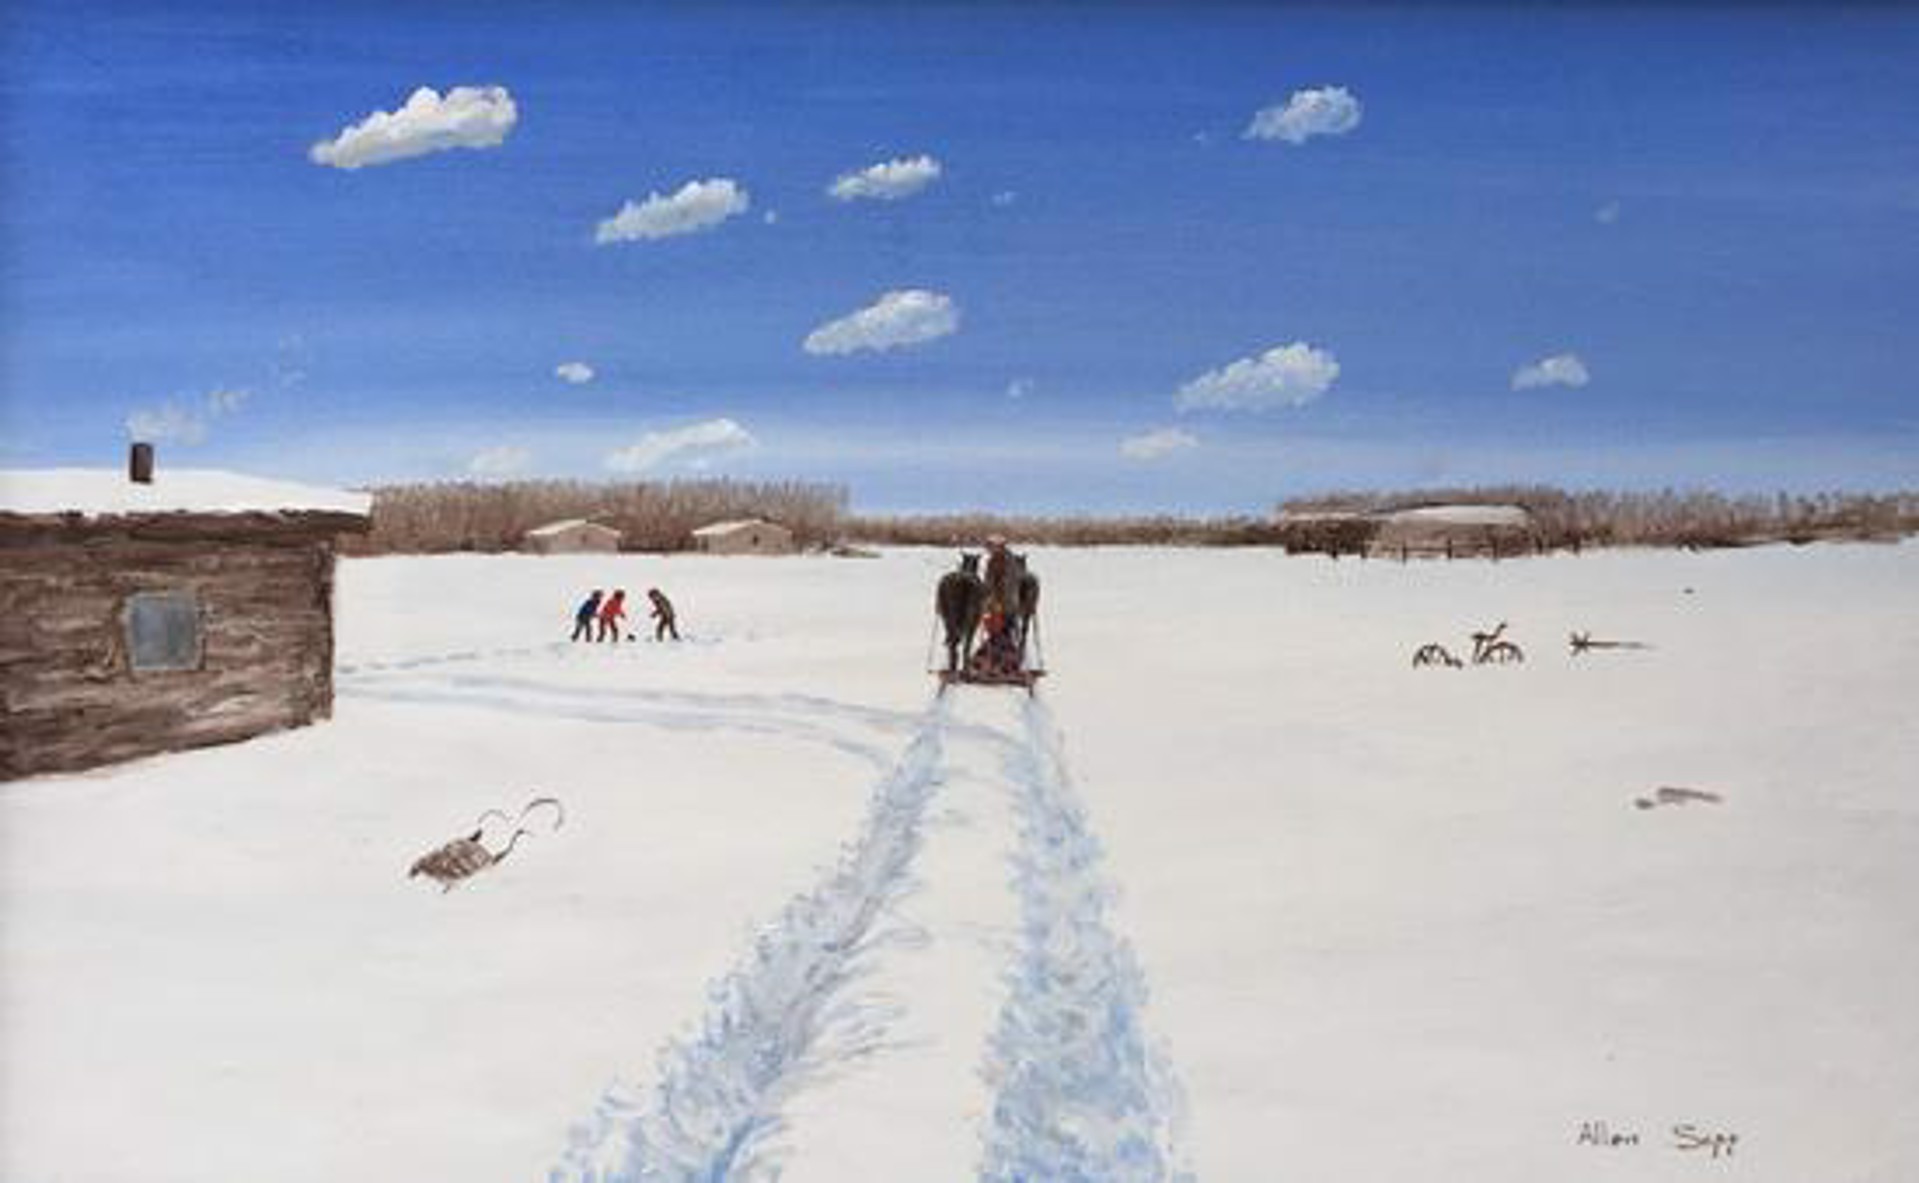 Coming Home By Sleigh by Allen Sapp (1928-2015)